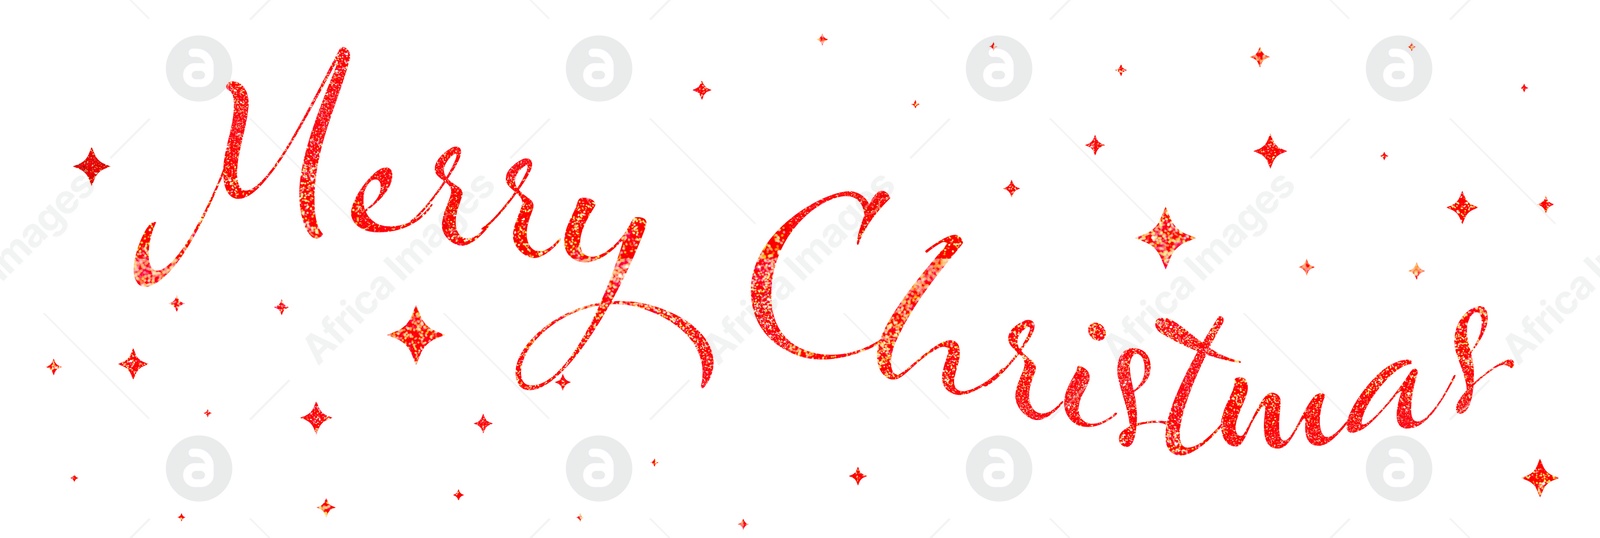 Illustration of Glittery red text Merry Christmas on white background